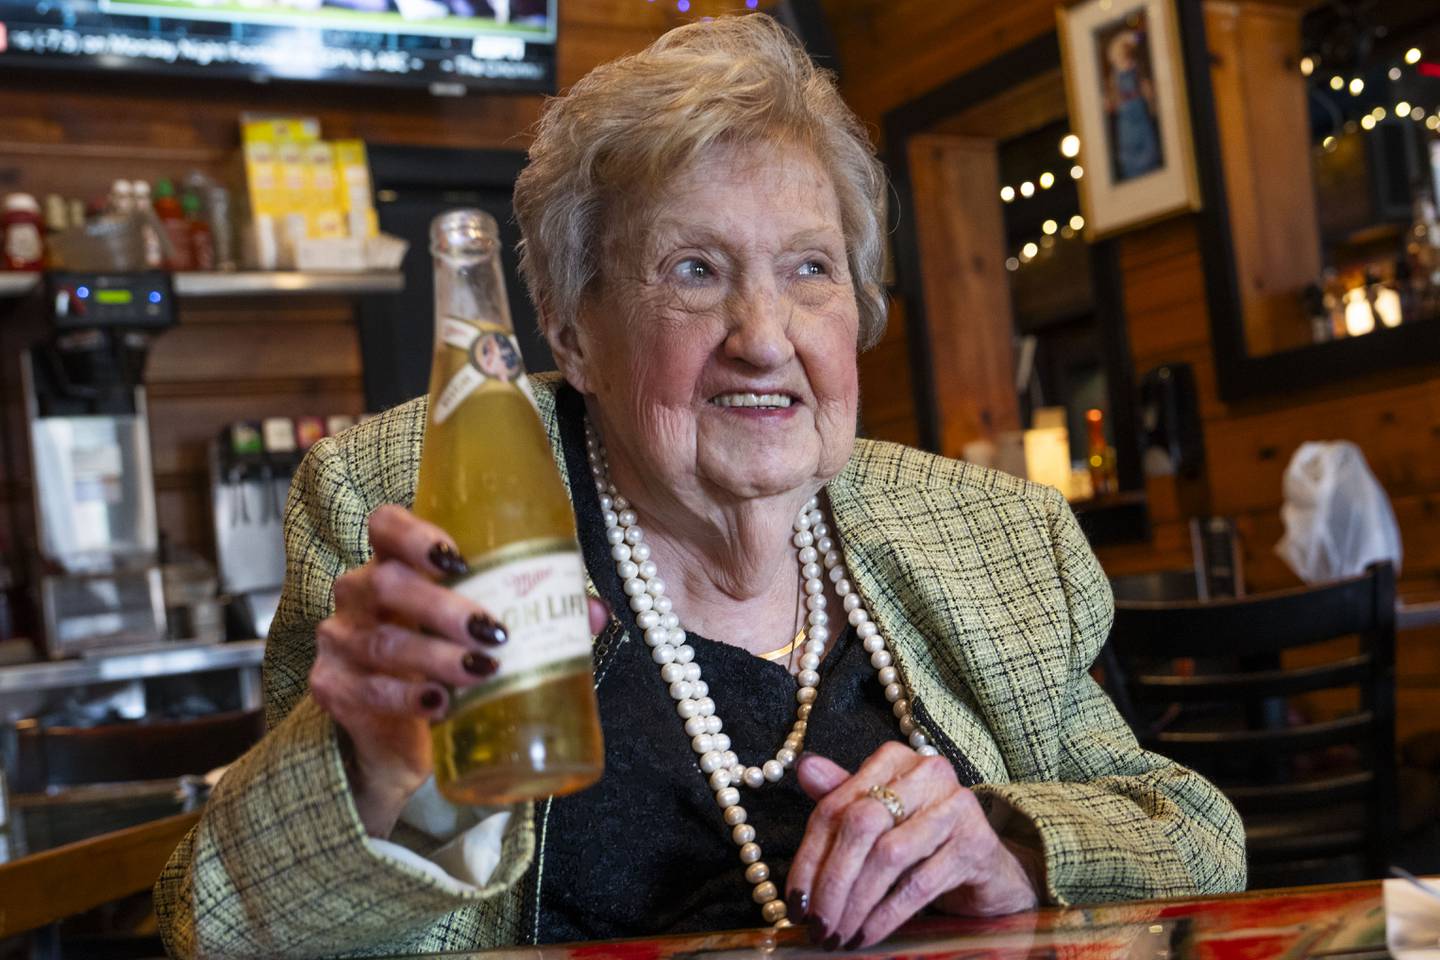 Peggy Bailey is a self-proclaimed Miller girl; when asked what her favorite beer is she responds with Miller High Life.